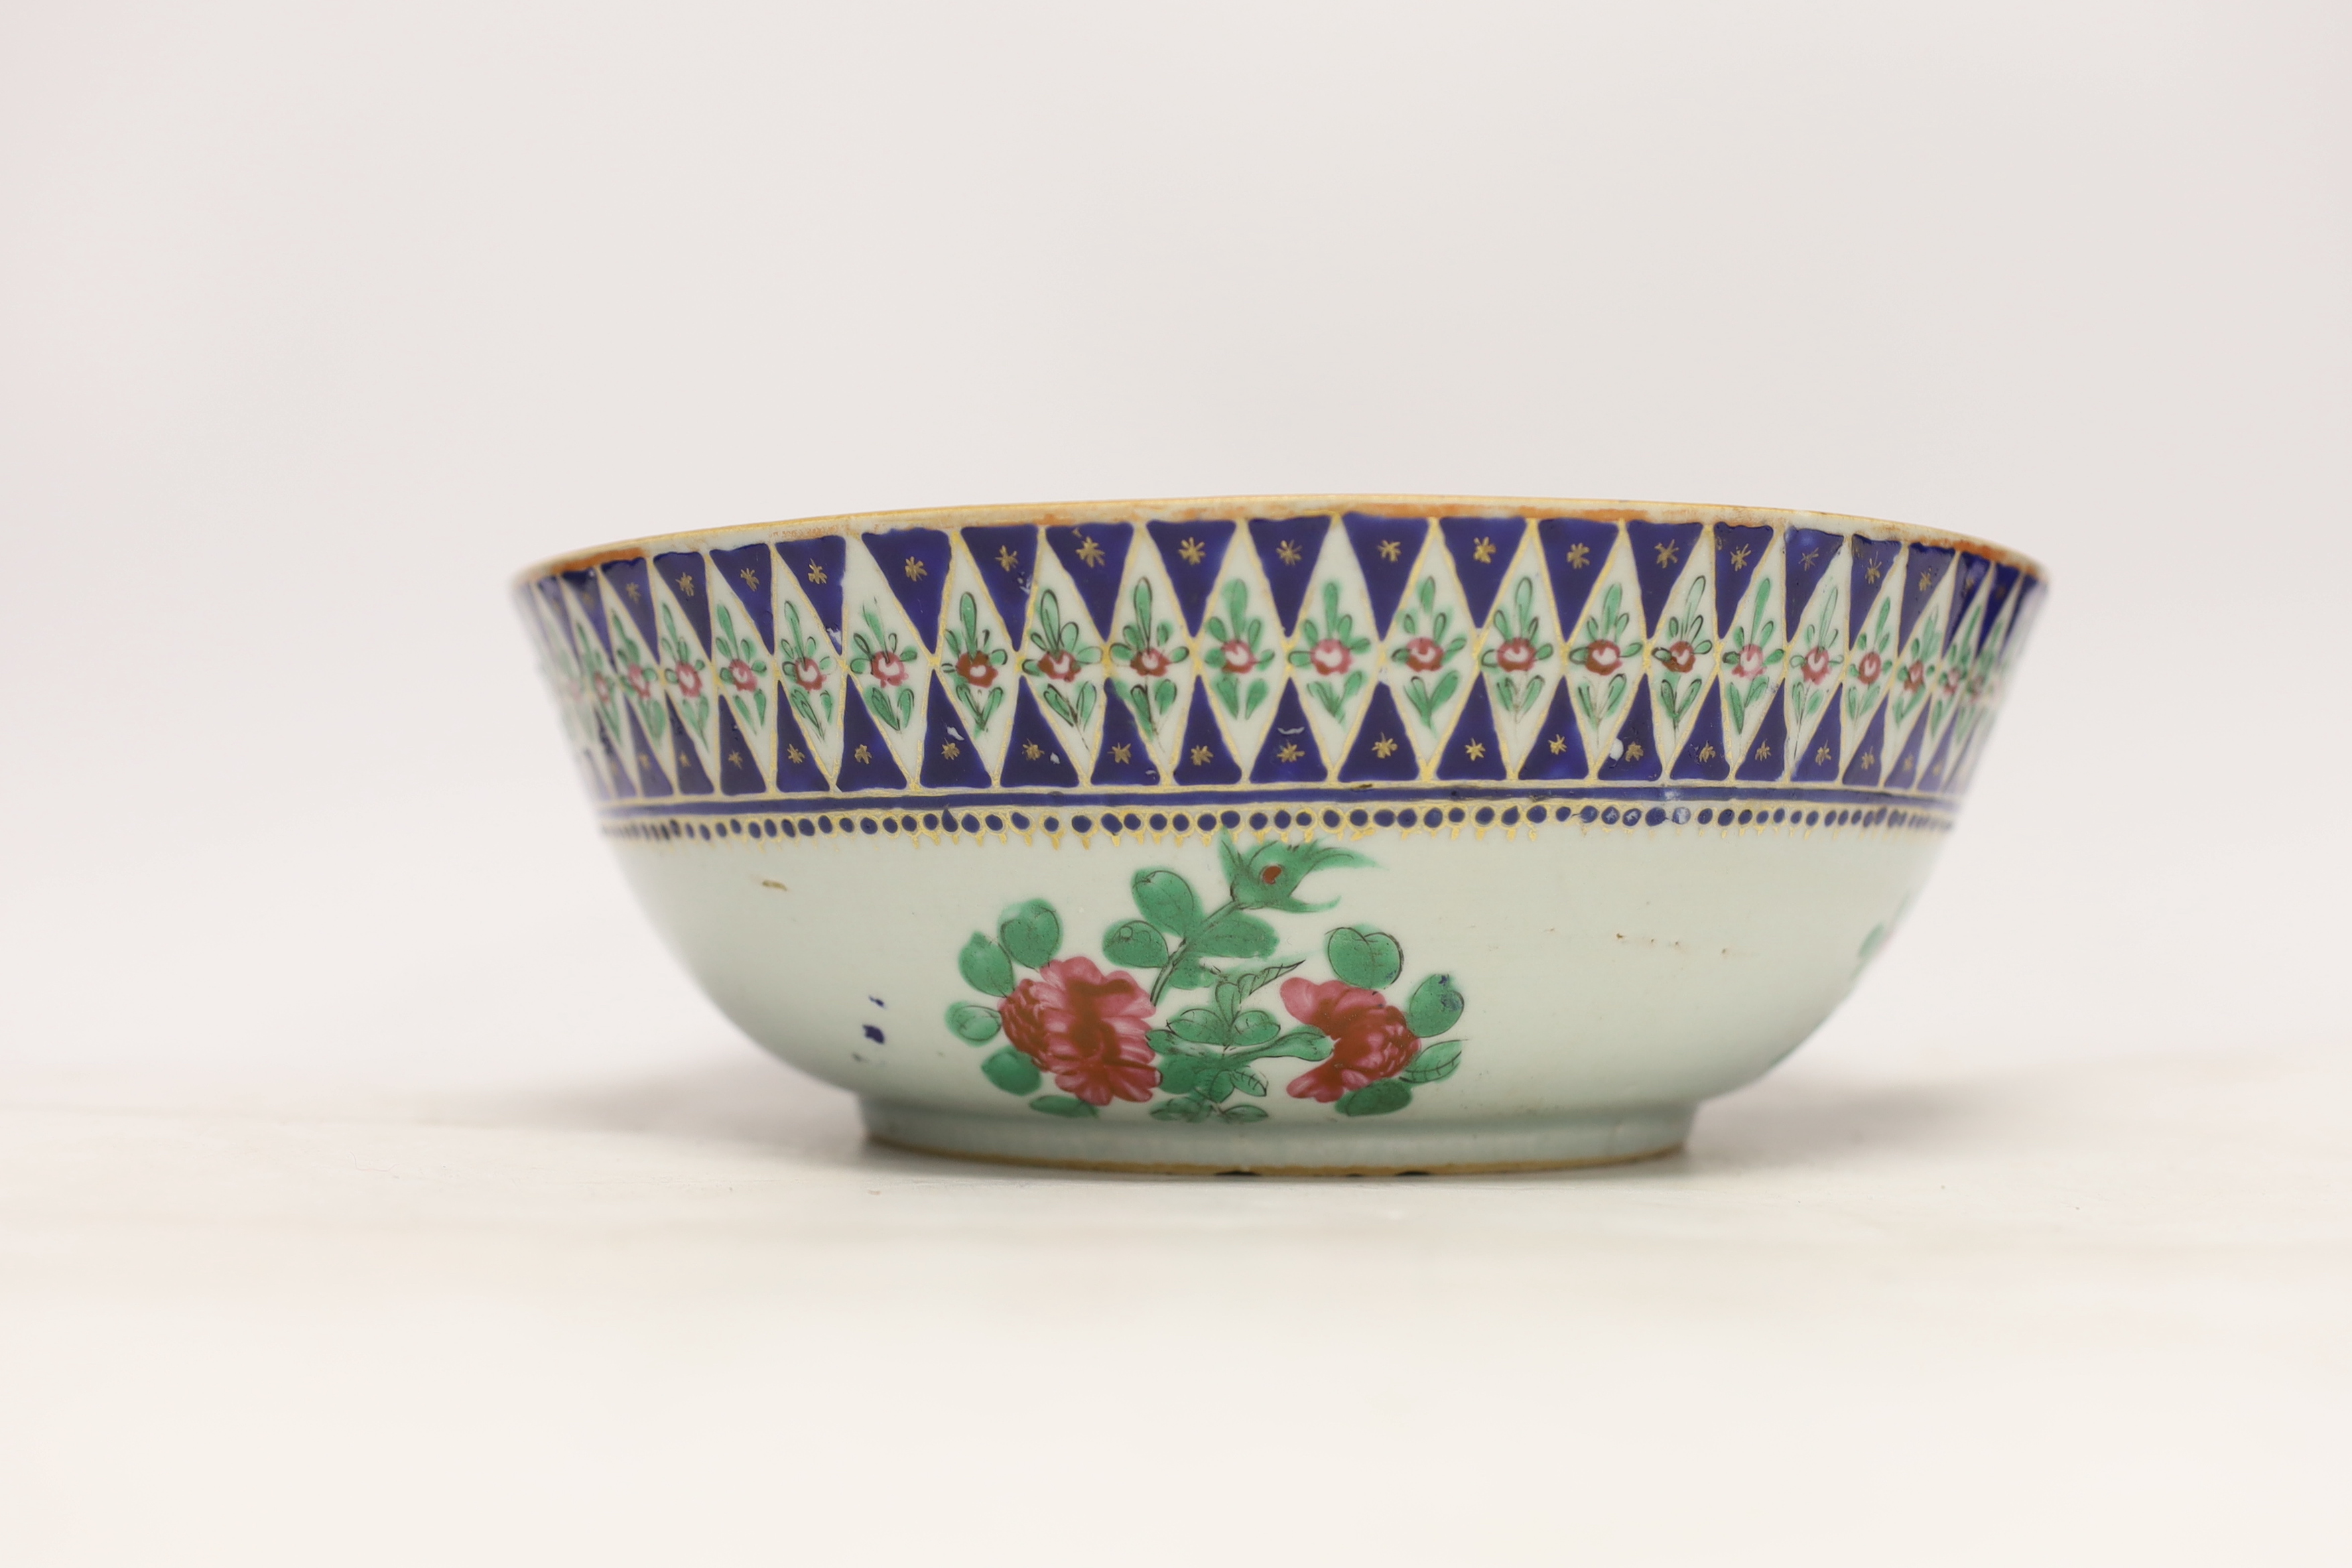 A large Chinese famille rose bowl, early 19th century, probably made for the Indian market, 26cm in diameter